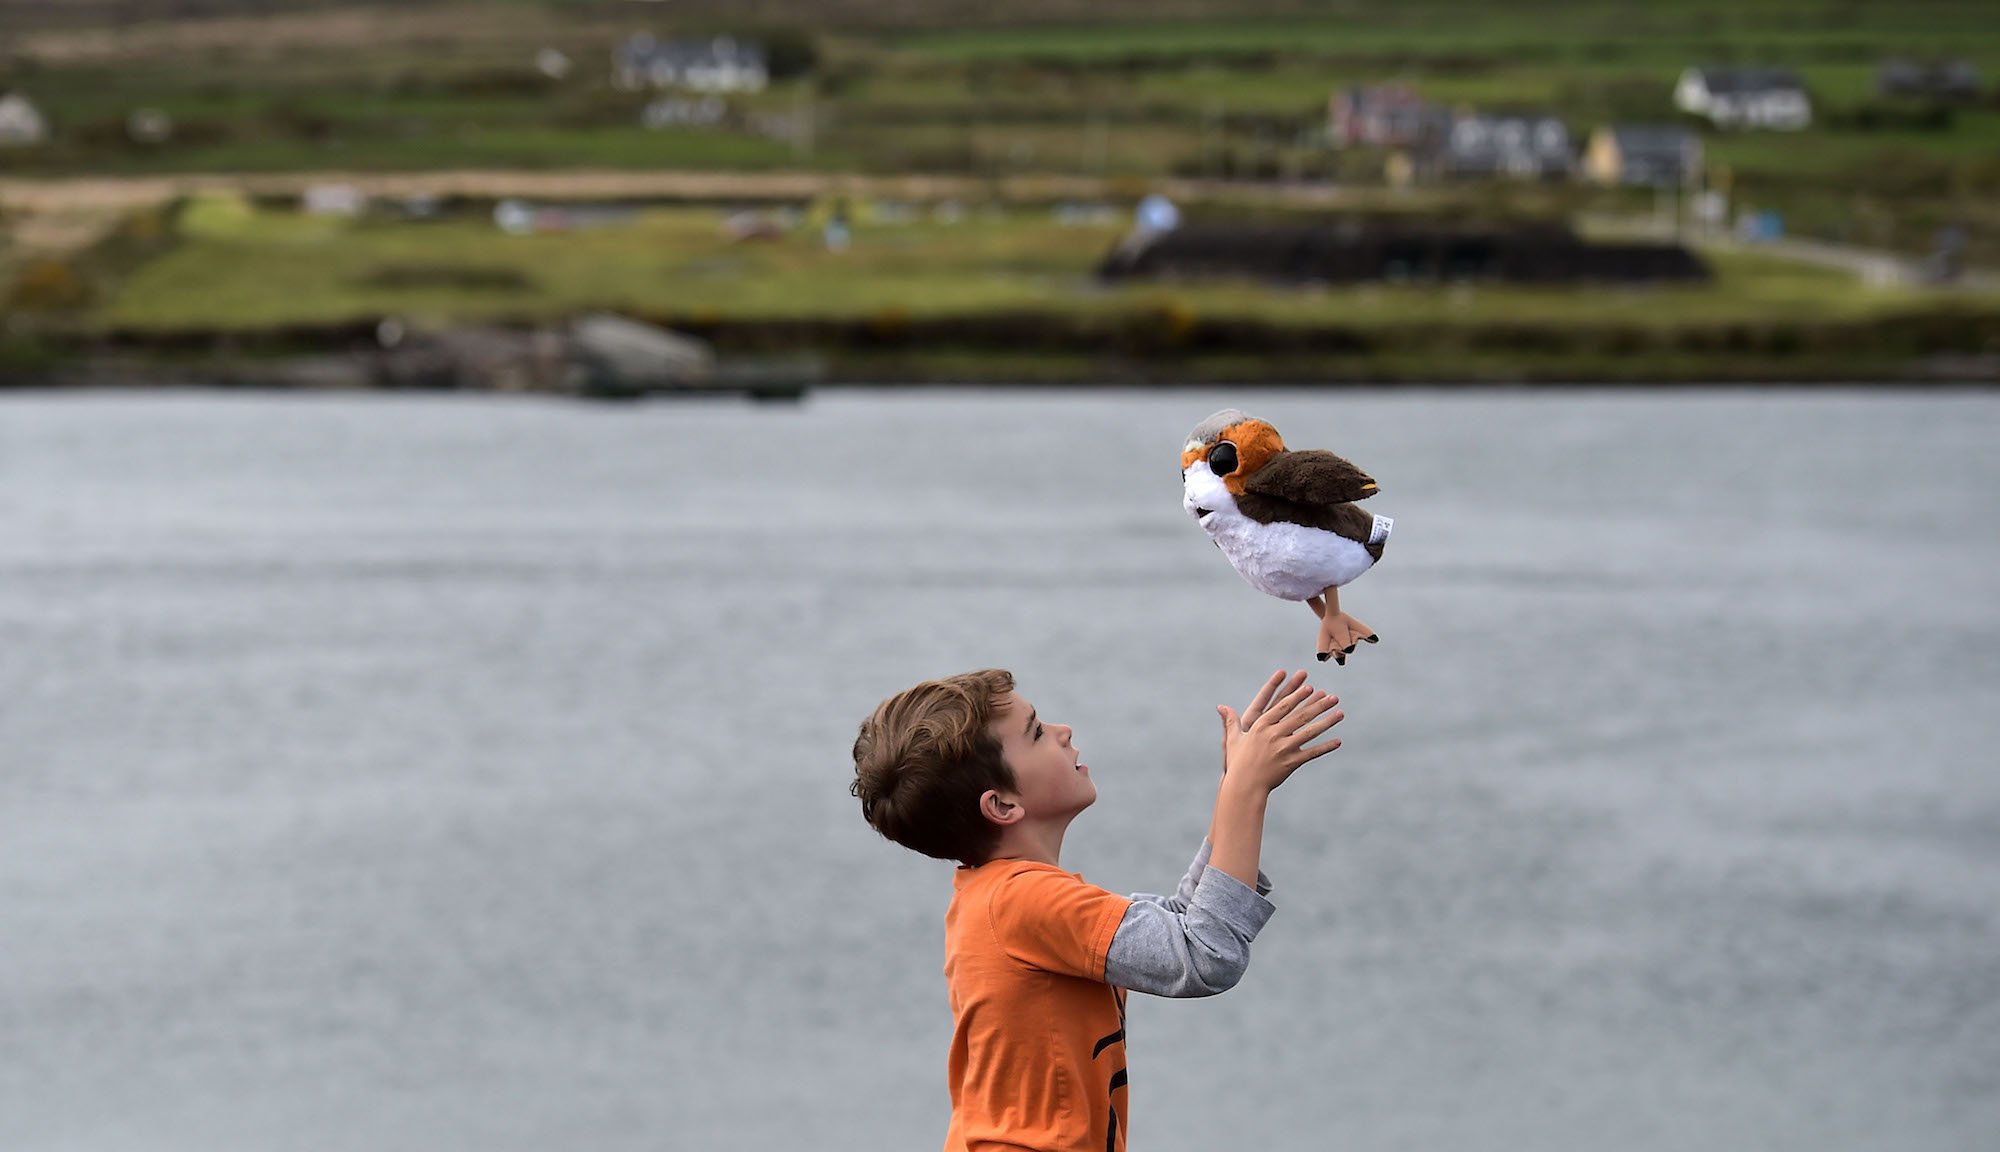 Teddy O'Connor, aged seven plays with his stuffed Porg